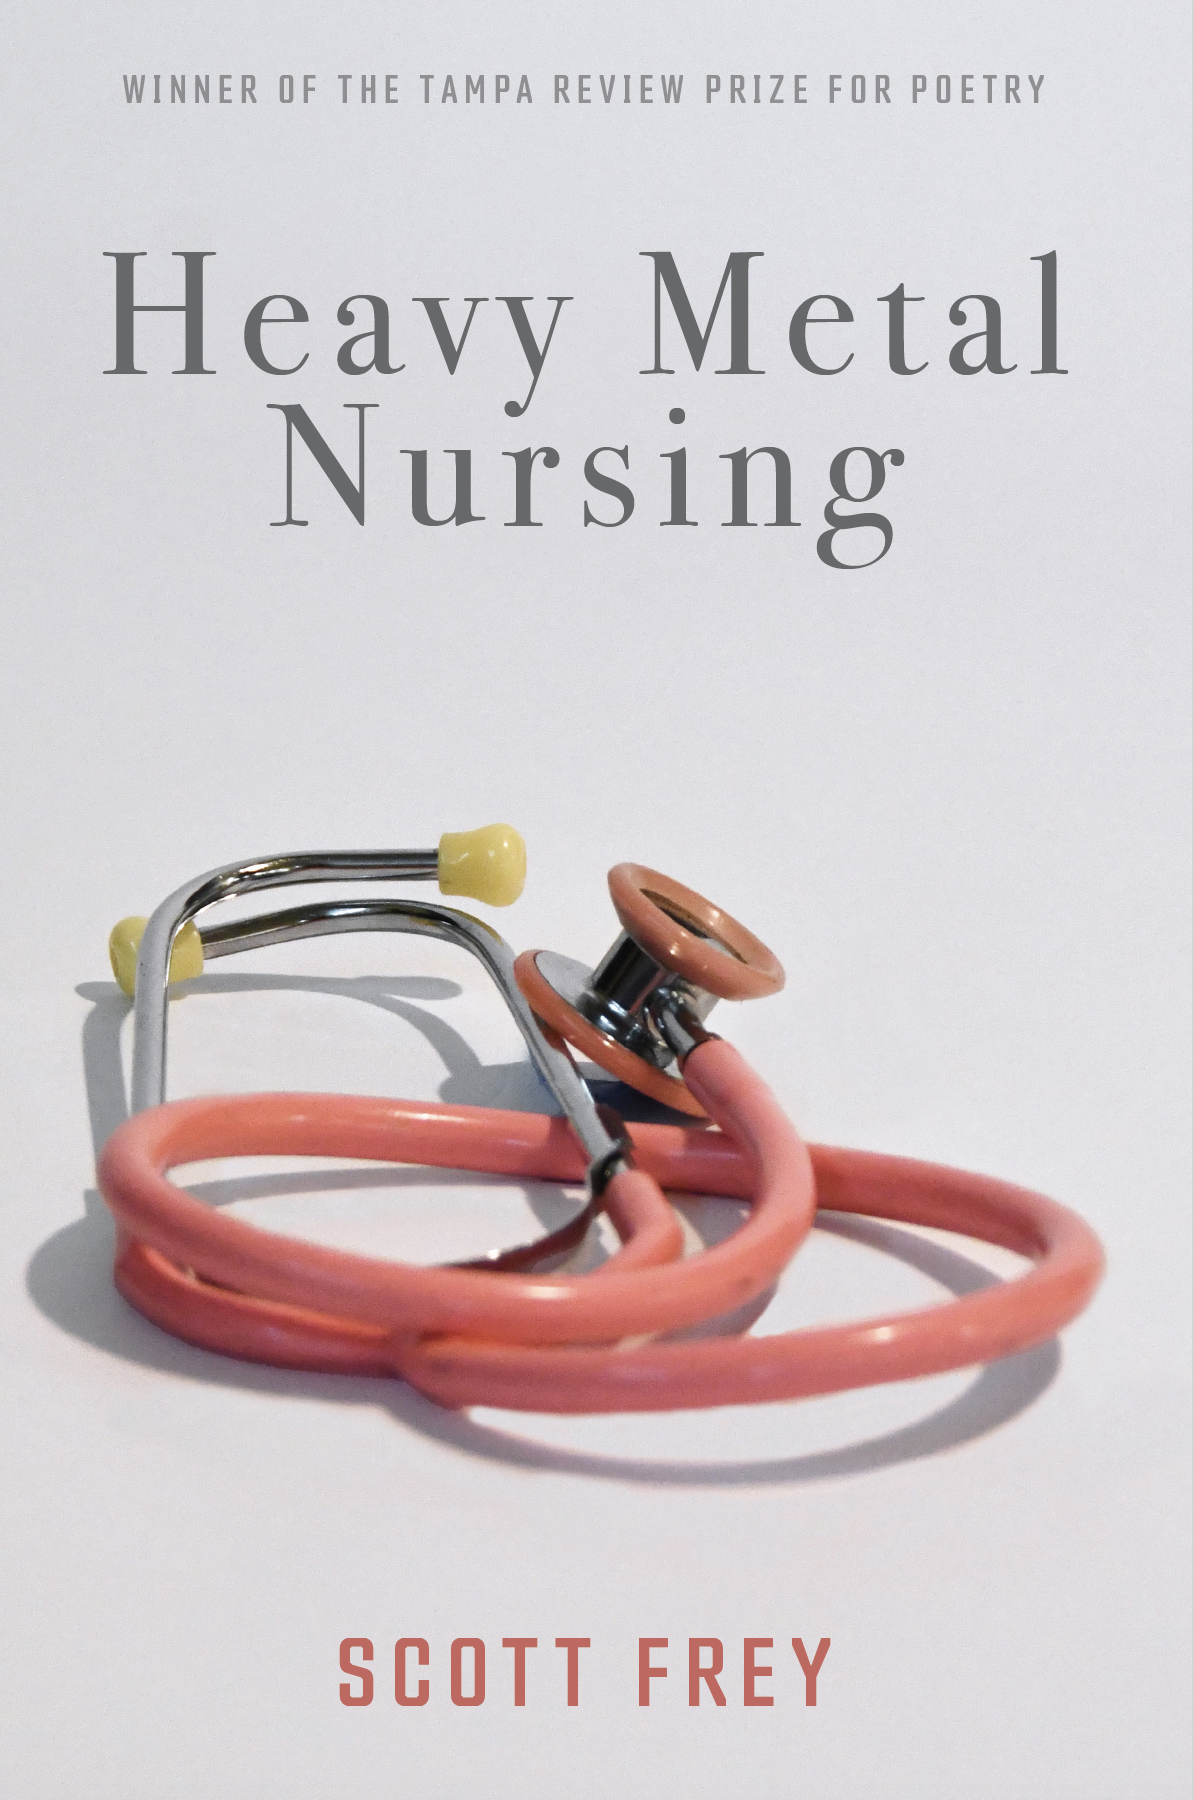 Image of the cover of Heavy Metal Nursing.